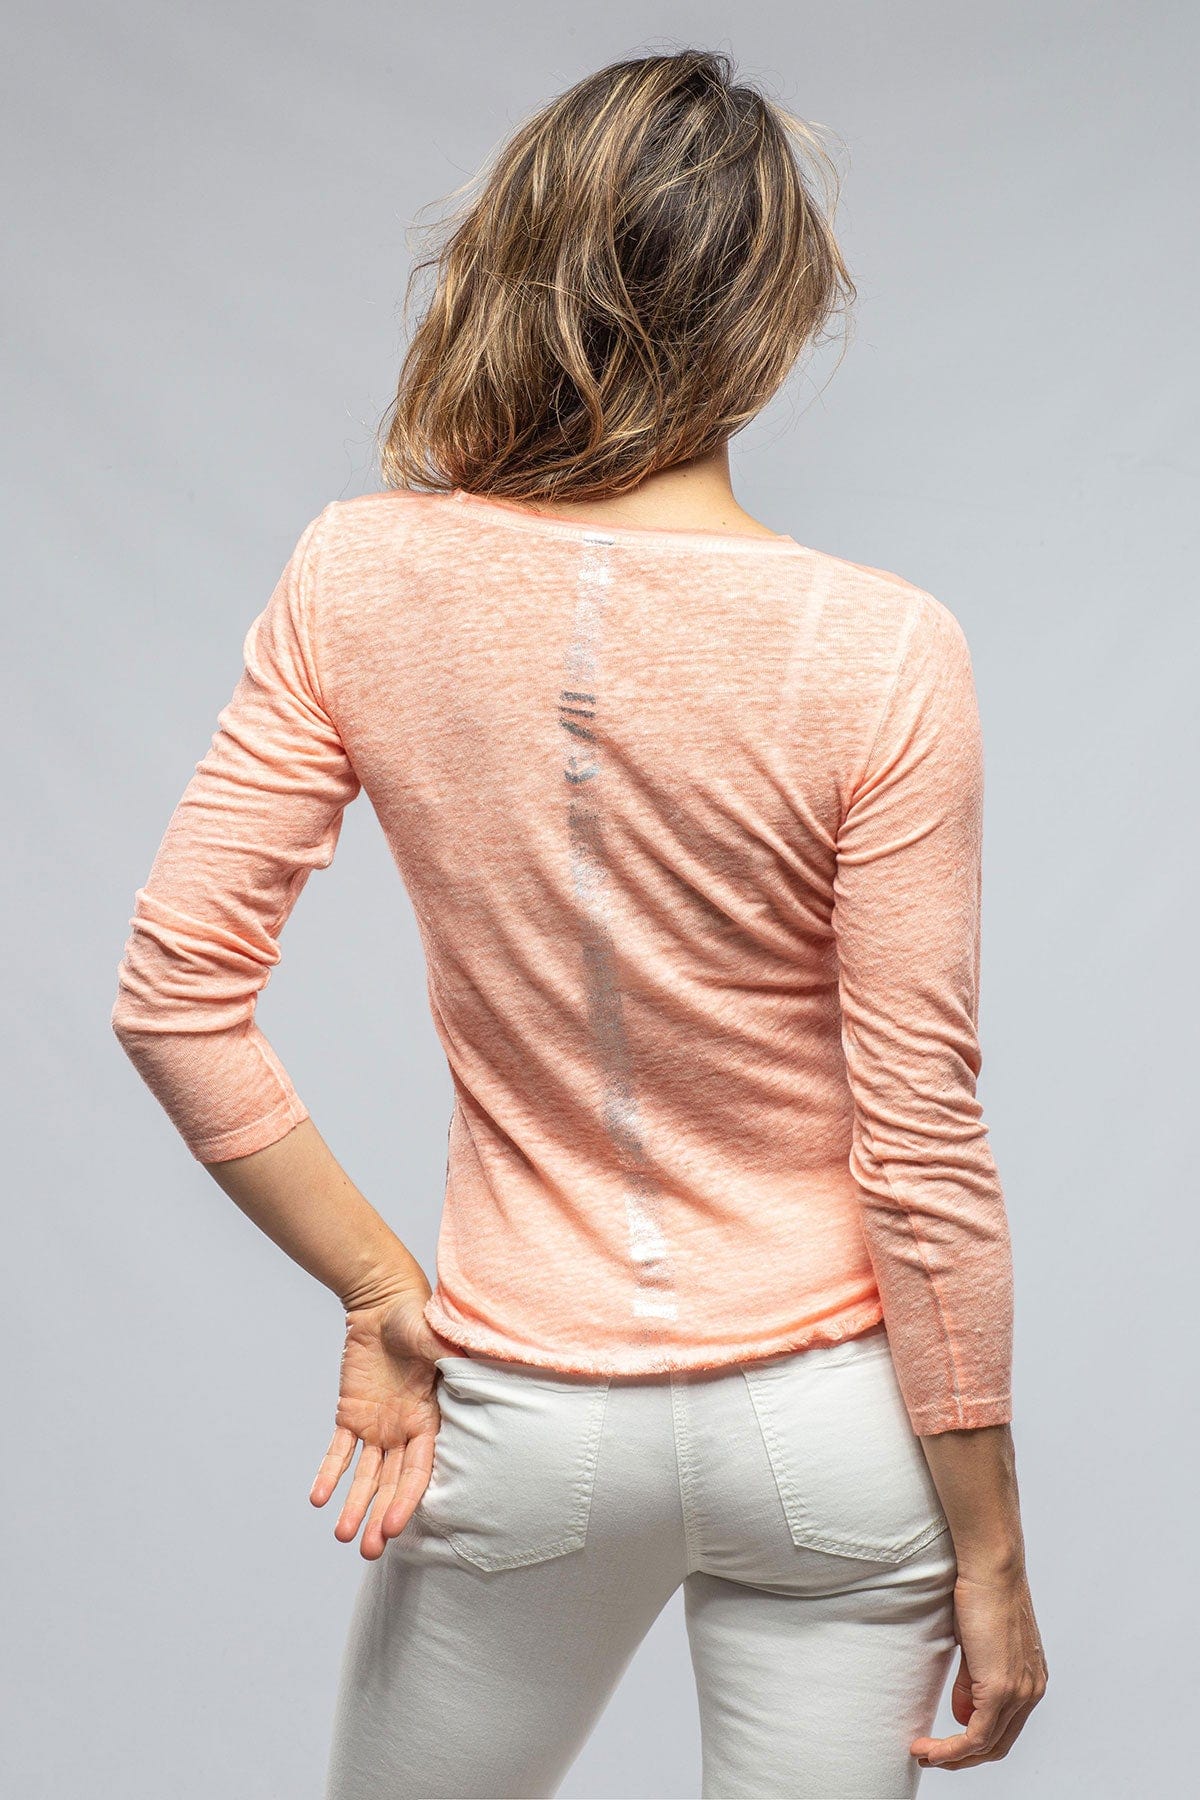 Elissa Linen L/S Fitted V-Neck in Sorbet - AXEL'S